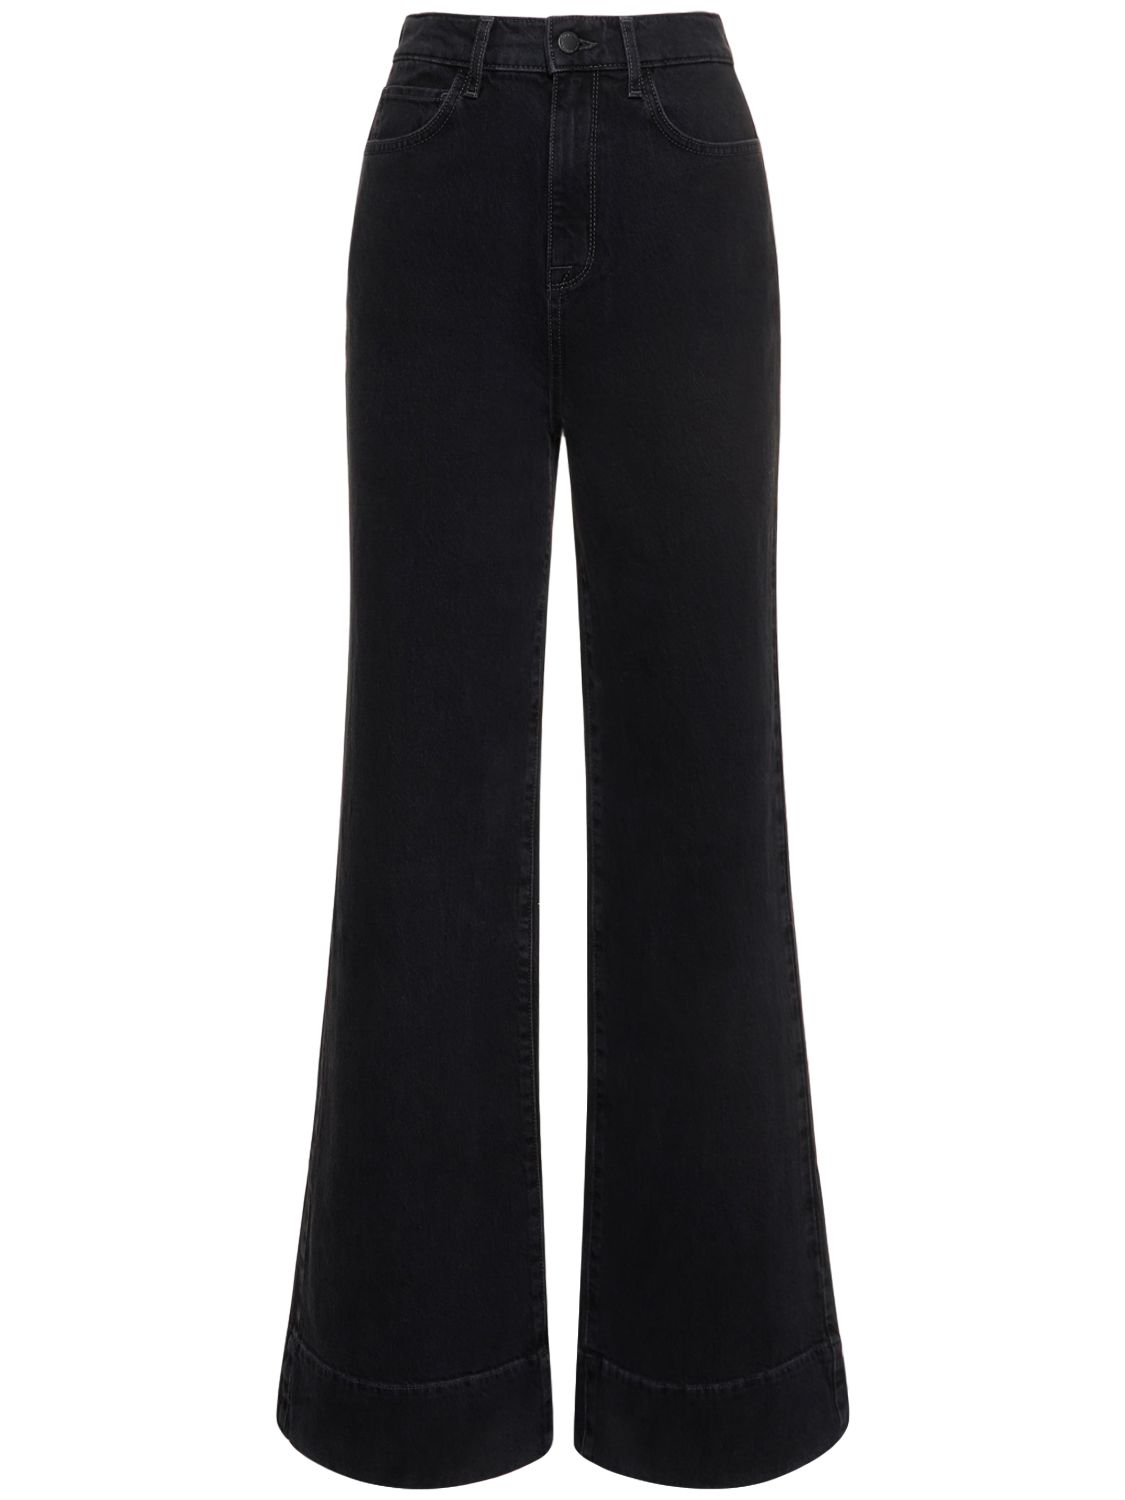 Ms. Onassis High Rise Wide Denim Jeans